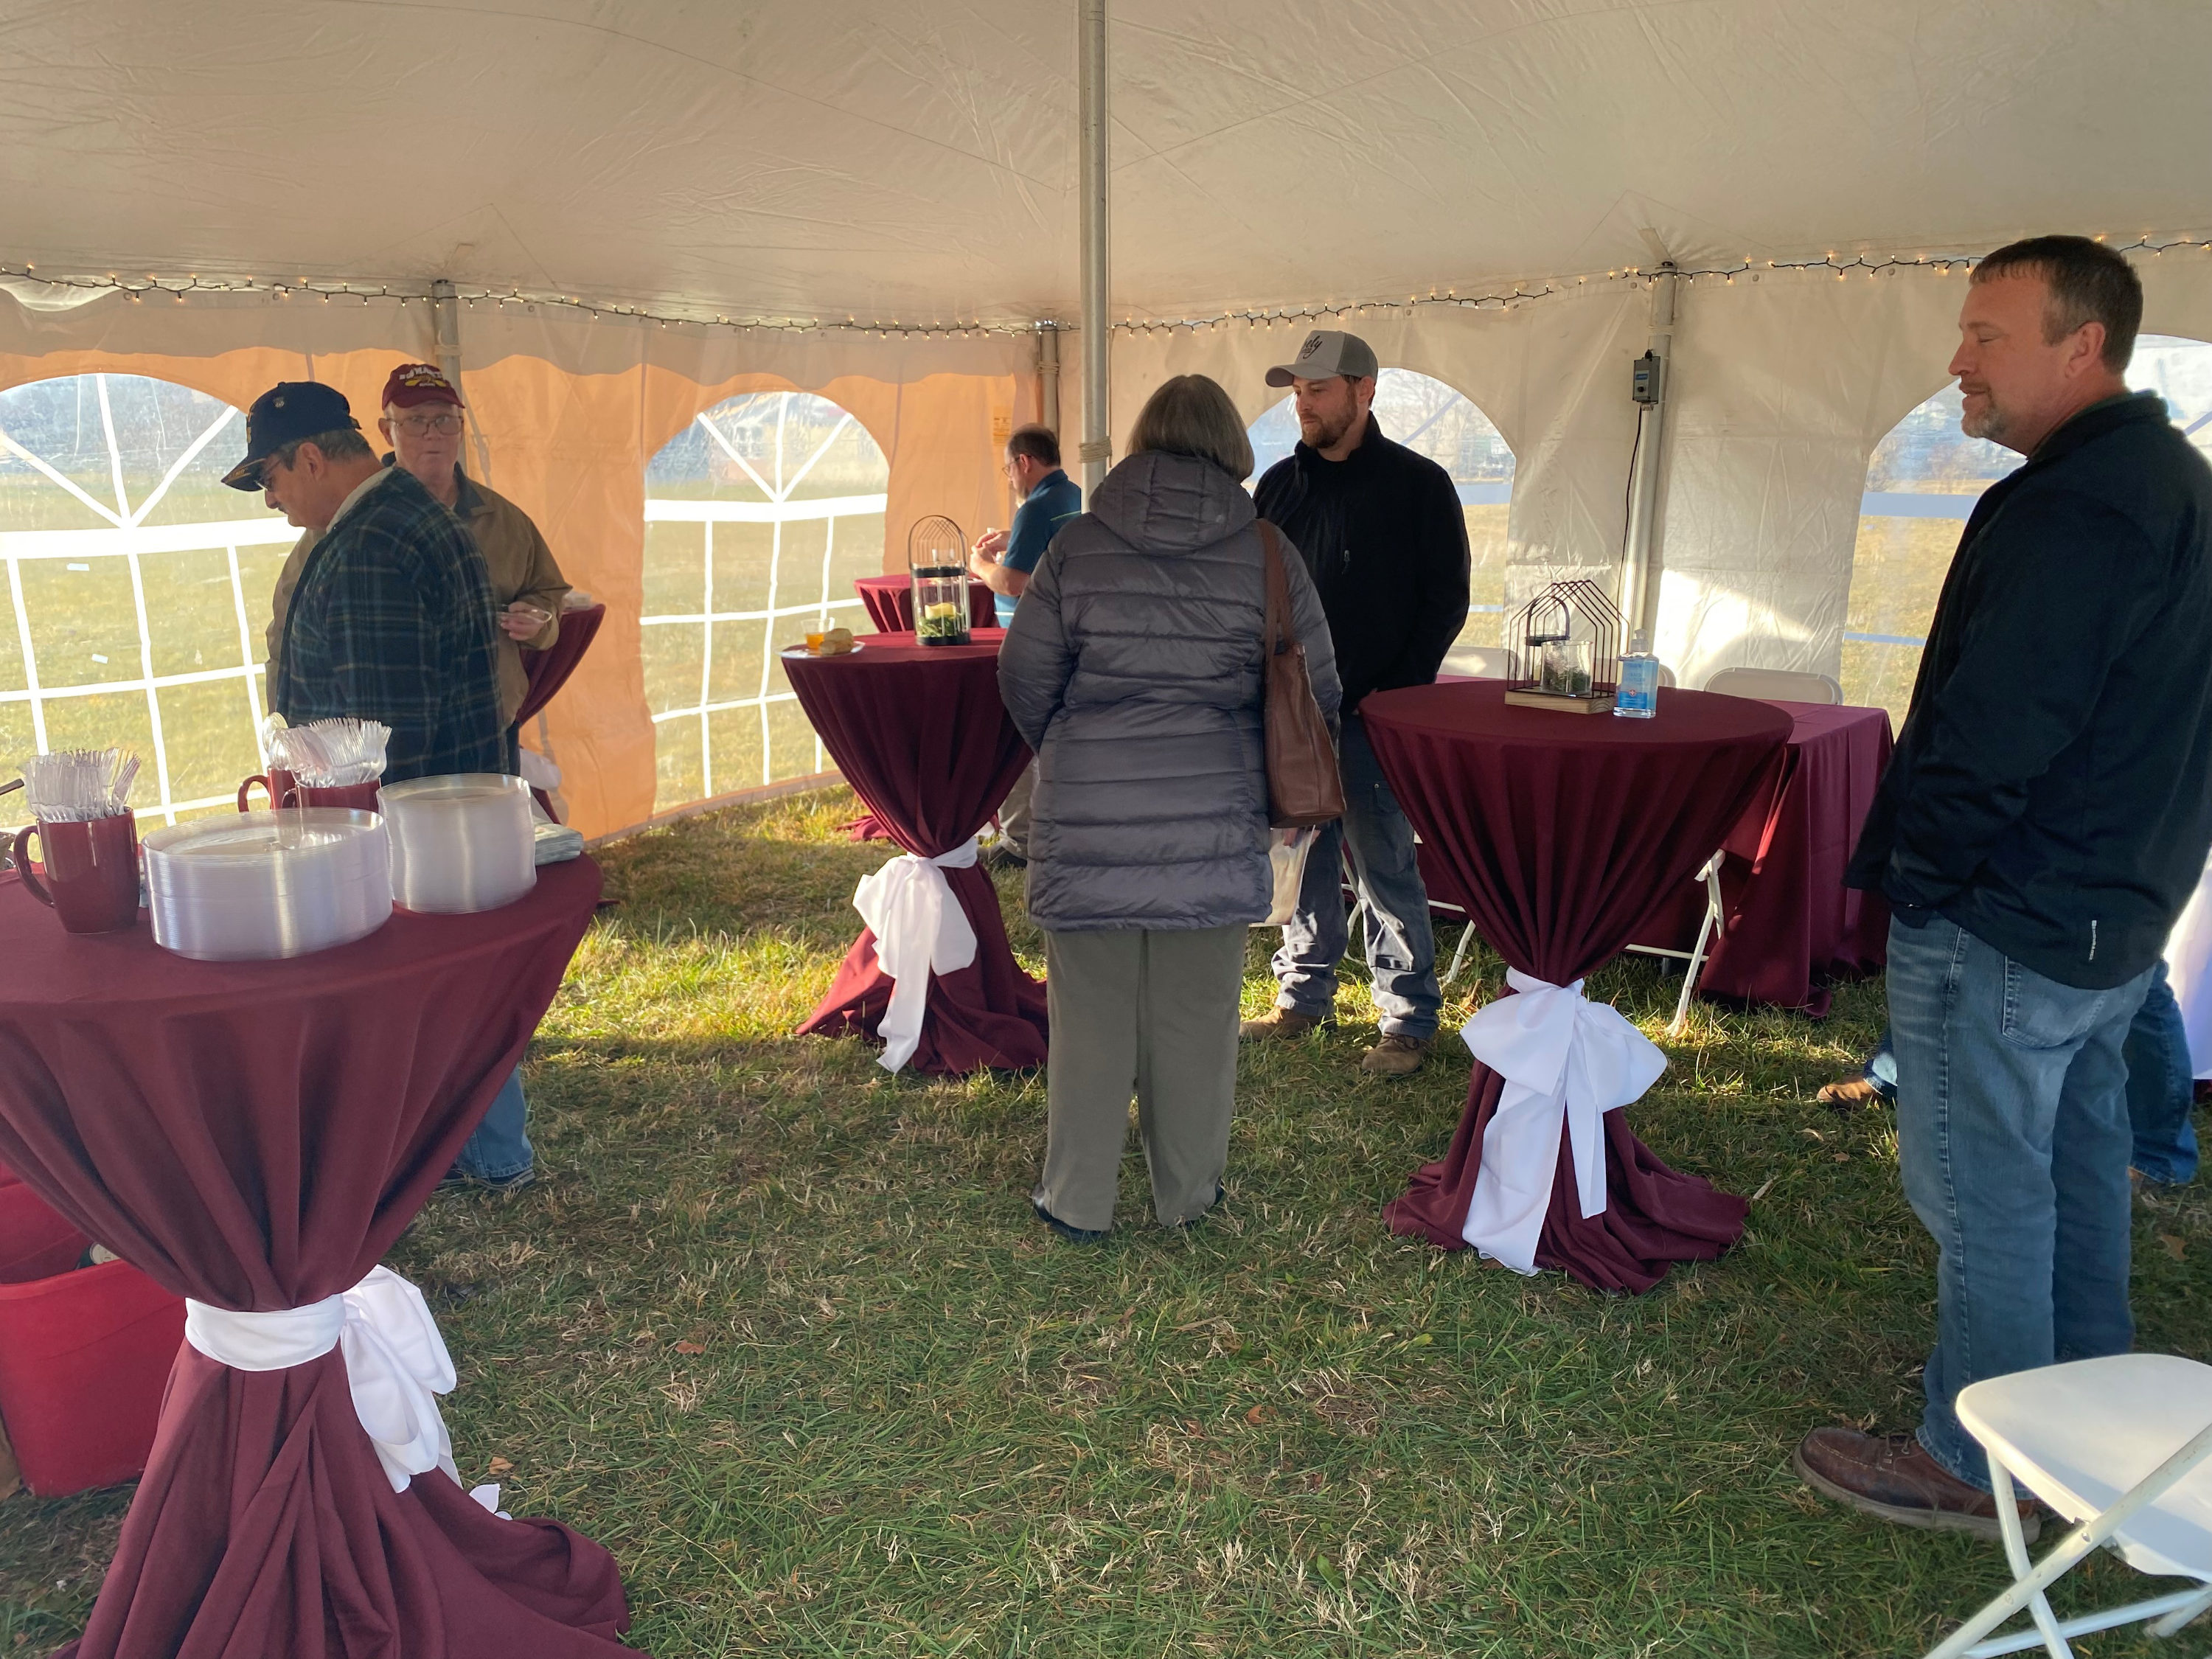 Seely Homes, Bridgeville Delaware Office Grand Opening Outdoor Welcome Tent